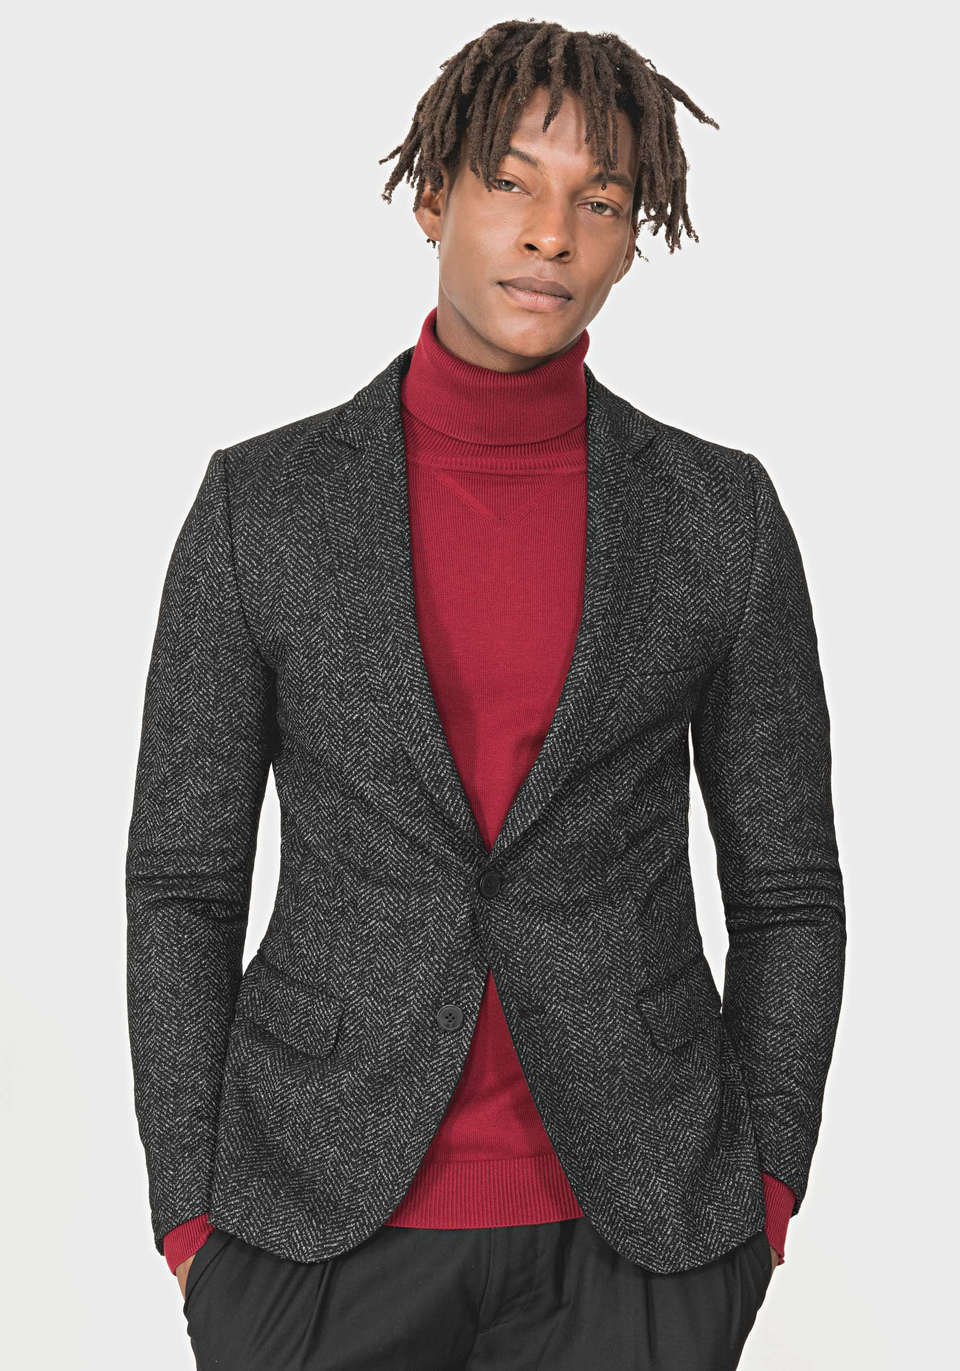 SUPER-SLIM-FIT “TRACY” JACKET IN A WOOL BLEND WITH A HERRINGBONE PATTERN - Antony Morato Online Shop